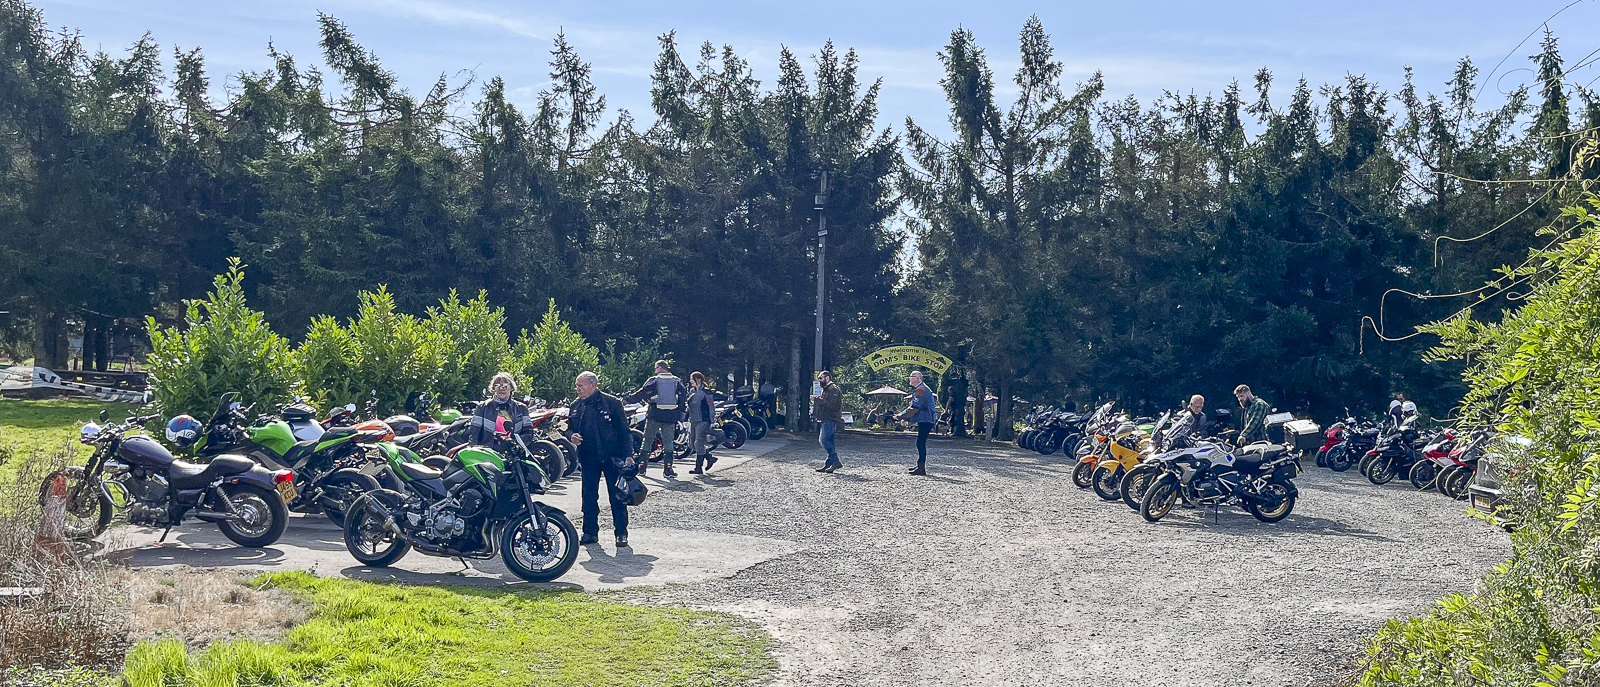 A bikers convention.jpg